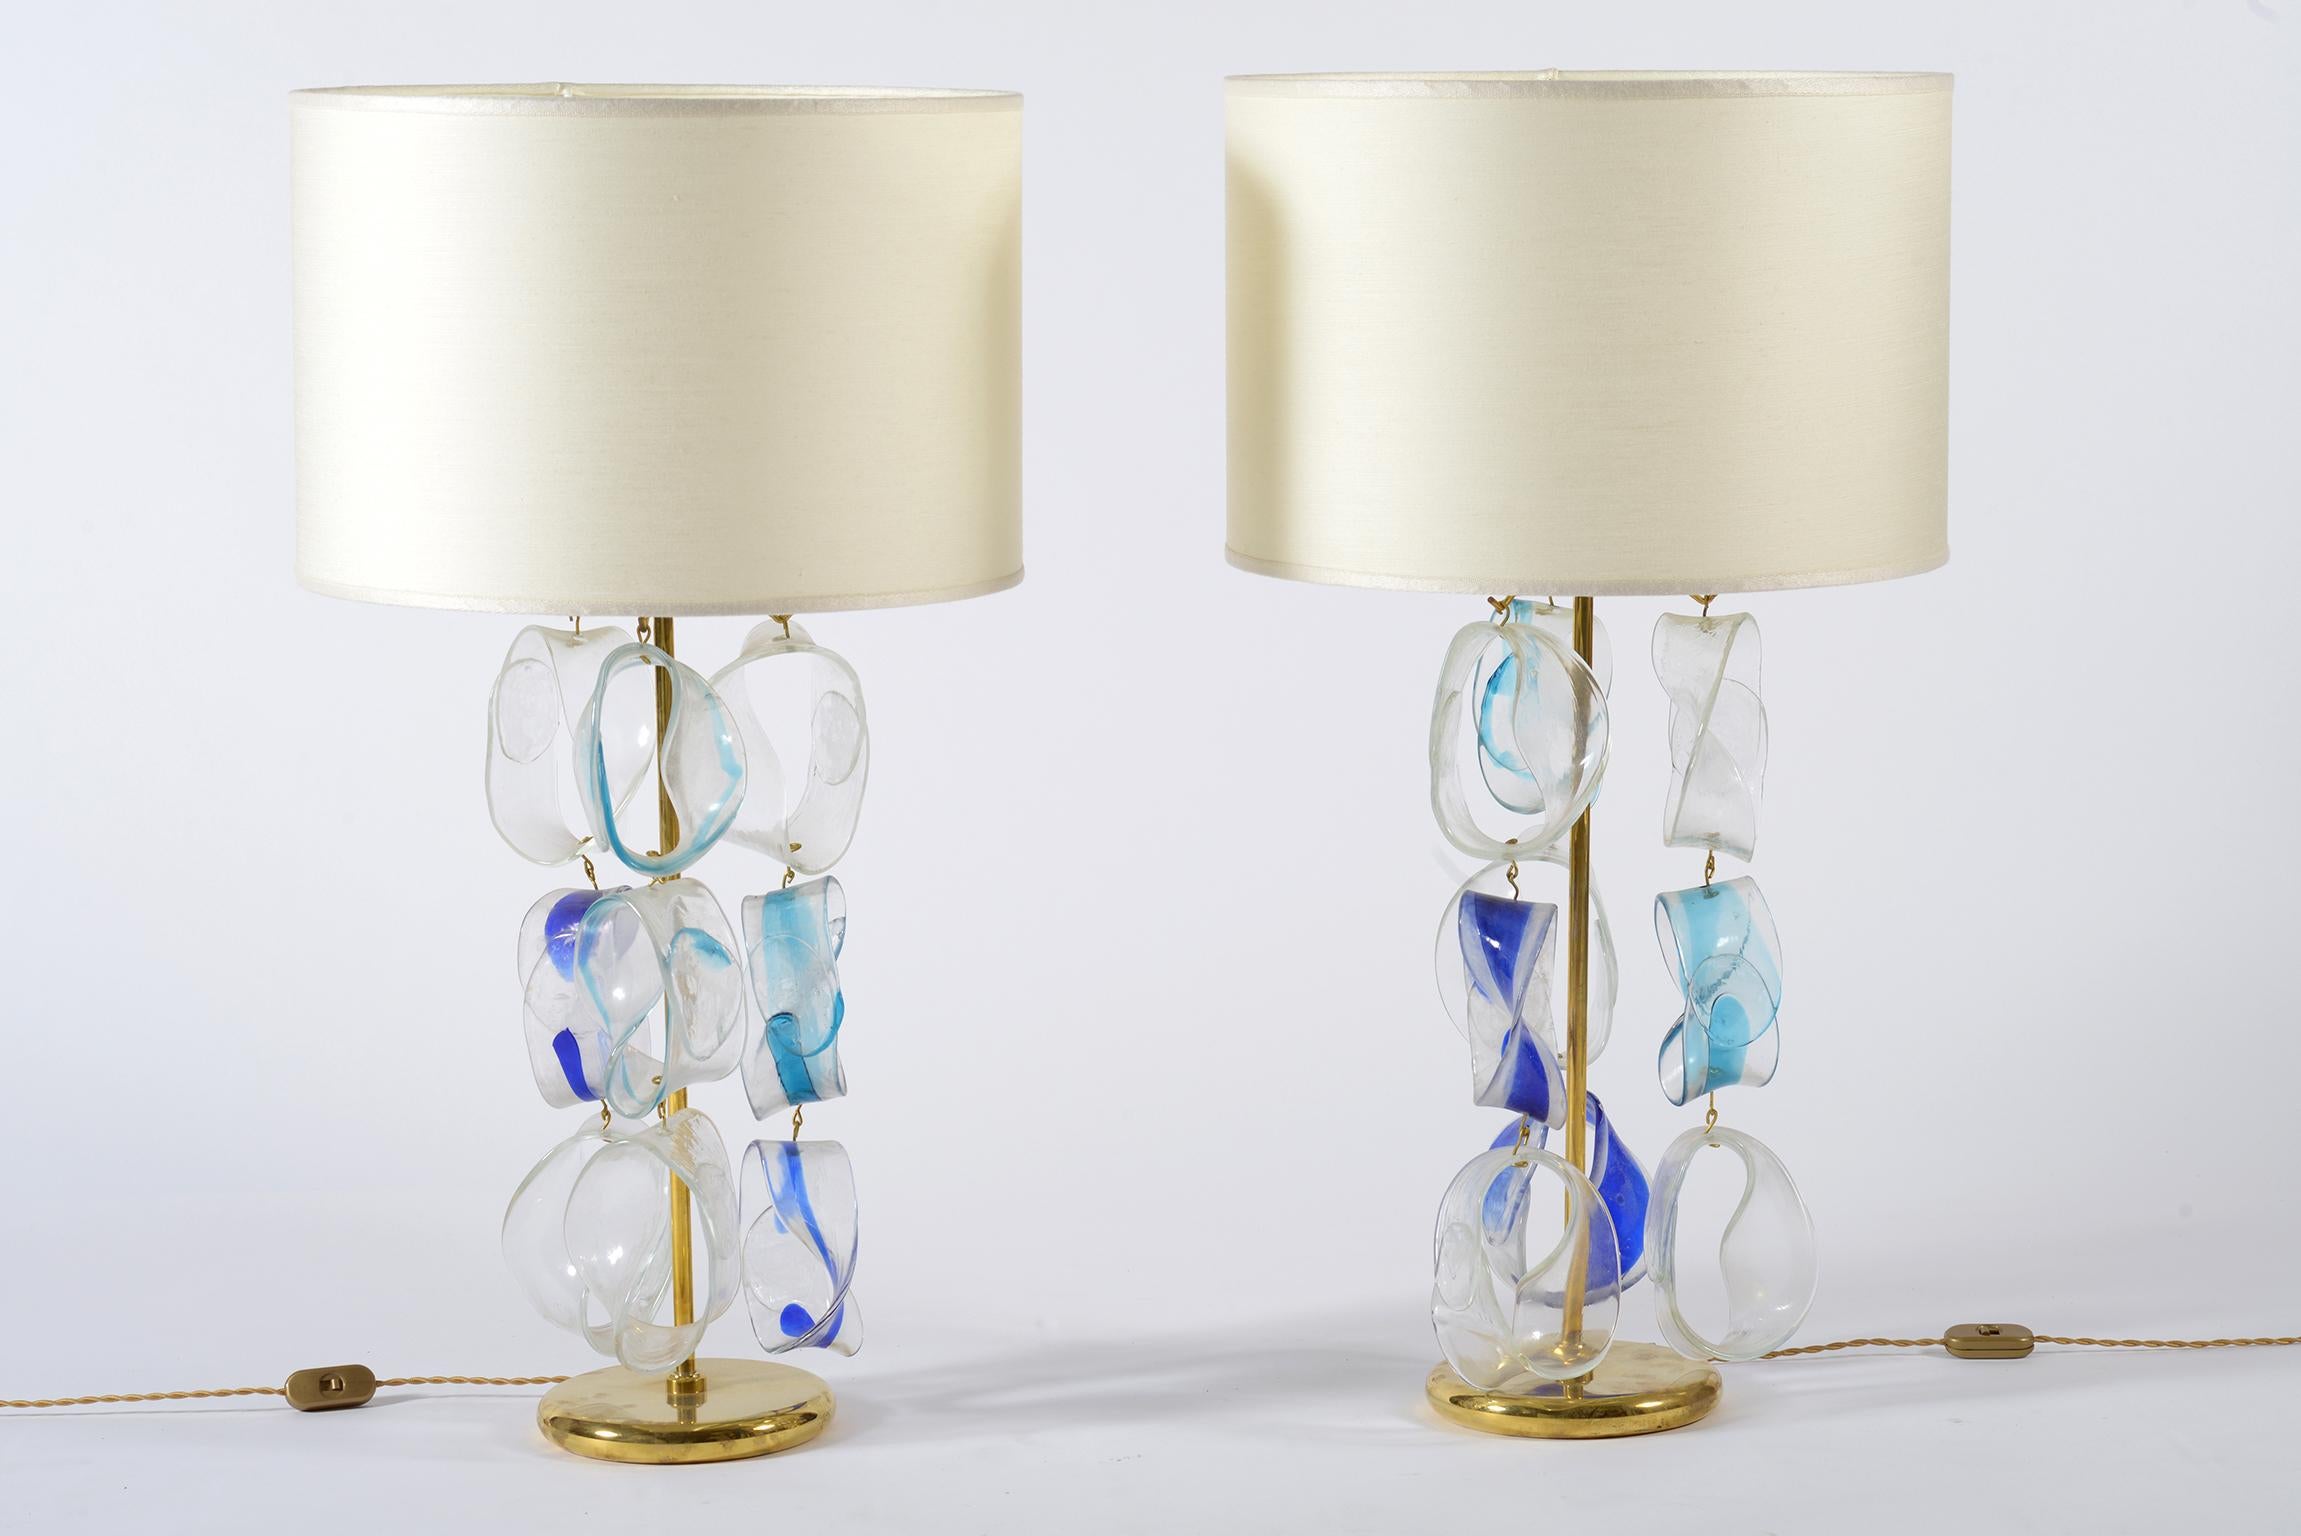 Pair of Murano glass table lamps made by the Mazzega manufactory with chains in transparent glass and blue brass.
The shades are new in light beige silk.
The measures are with lampshades.
Italia midcentury, 1960.